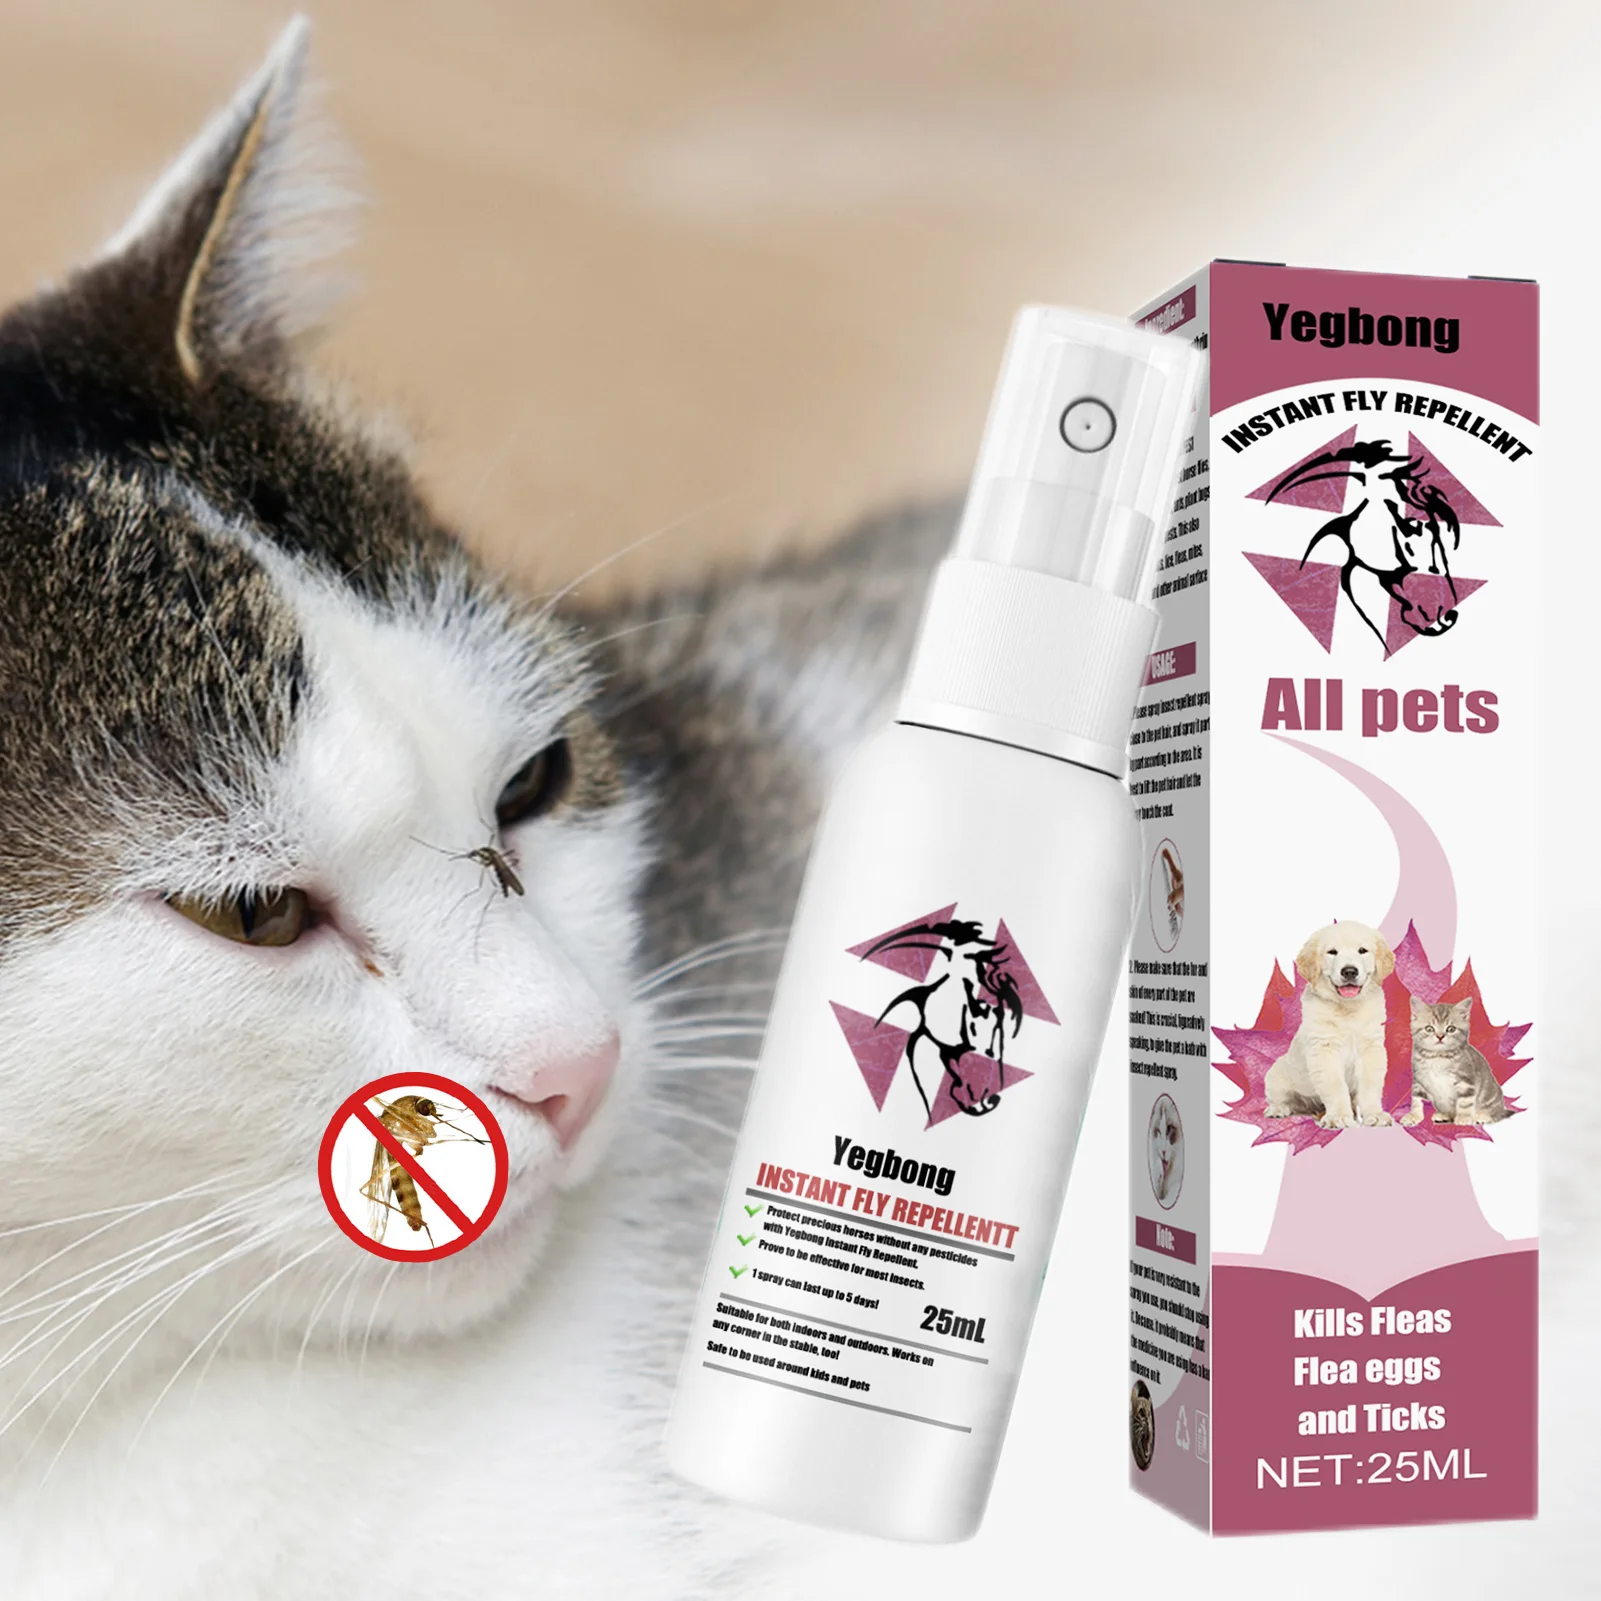 

25ml Pet Fur Spray Flea Tick And Mosquito Spray For Dogs Cats And Home Flea Treatments For Dogs And Home Flea Killers Soothing